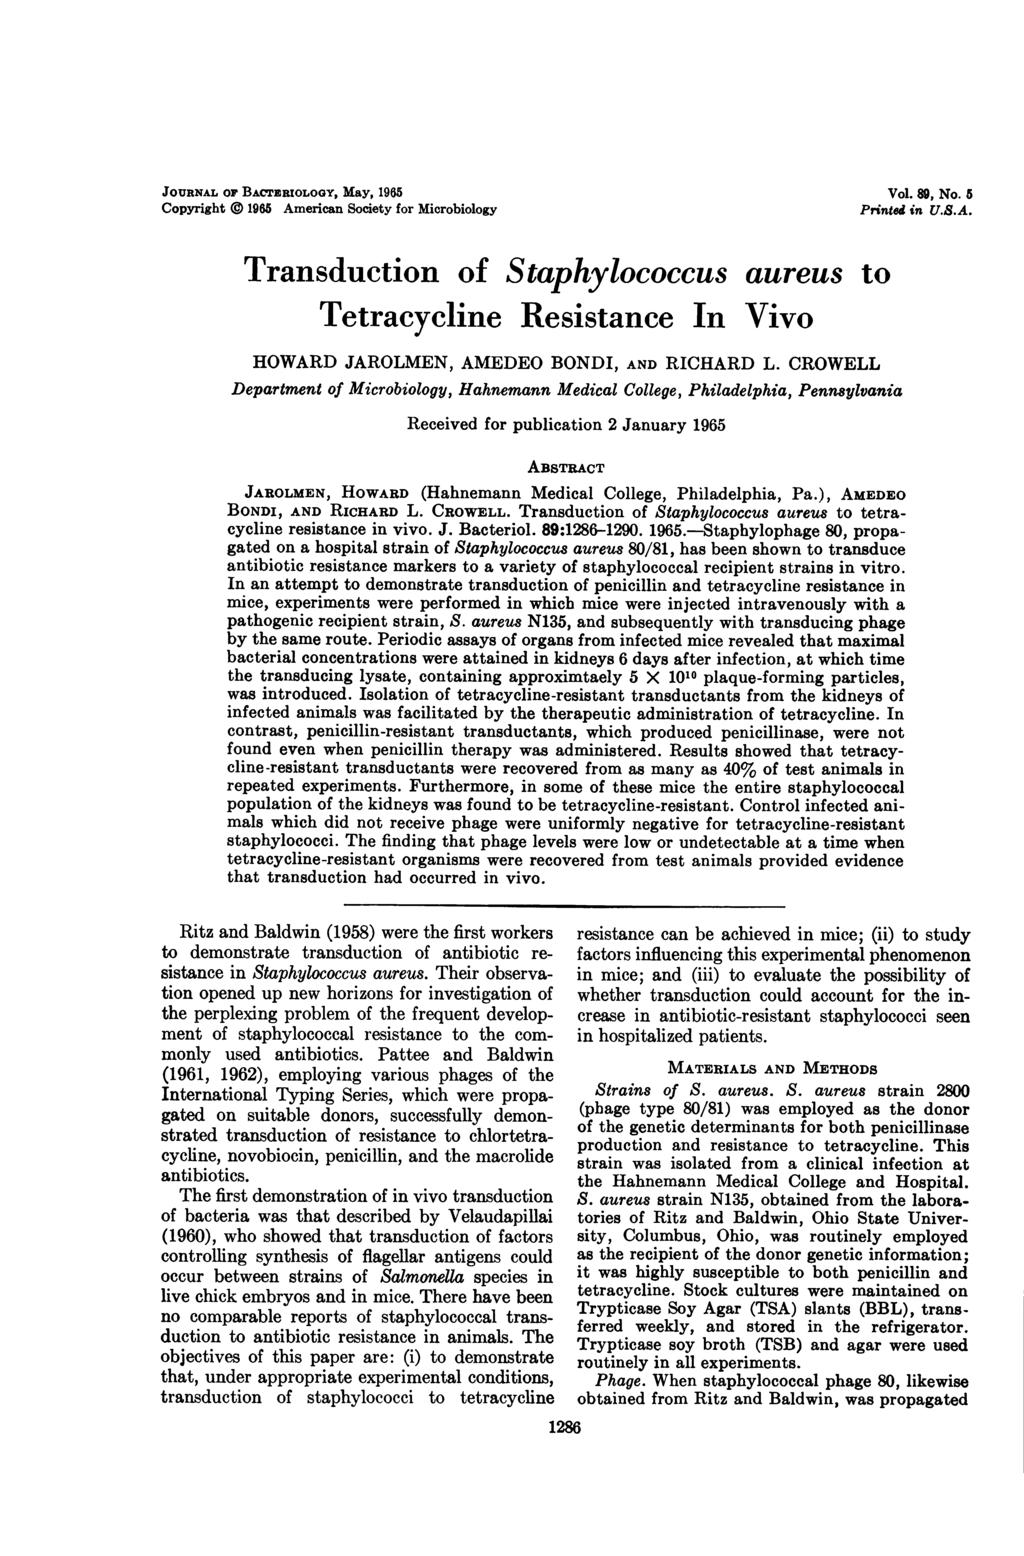 JOURNAL OF BACTPERIOLOGY, May, 1965 Copyright 1965 American Society for Microbiology Vol. 89, No. 5 Printed in U.S.A. Transduction of Staphylococcus aureus to Tetracycline Resistance In Vivo HOWARD JAROLMEN, AMEDEO BONDI, AND RICHARD L.